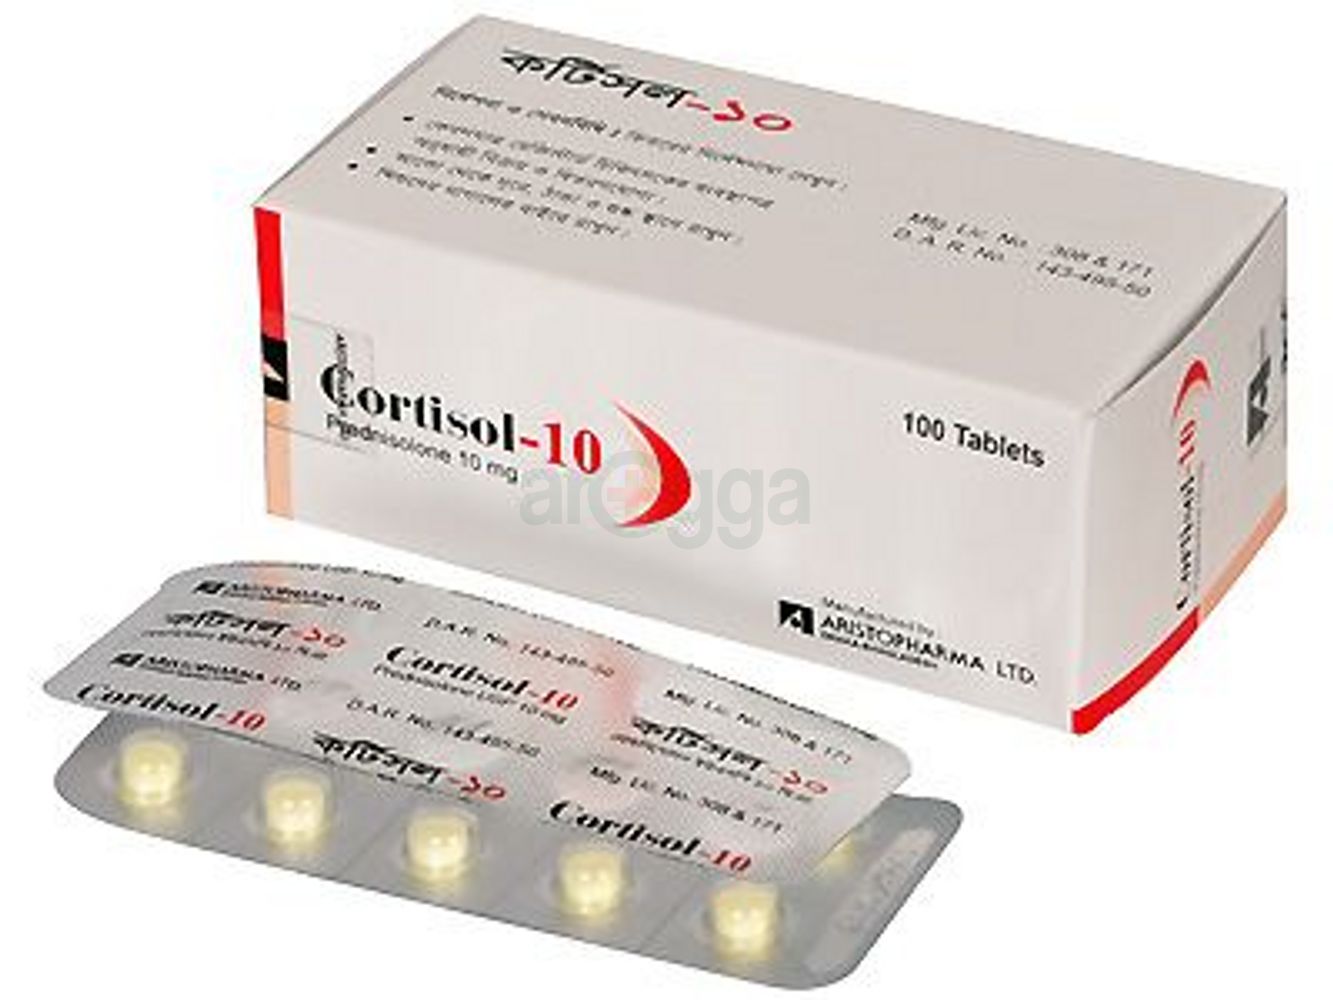 Cortisol 10